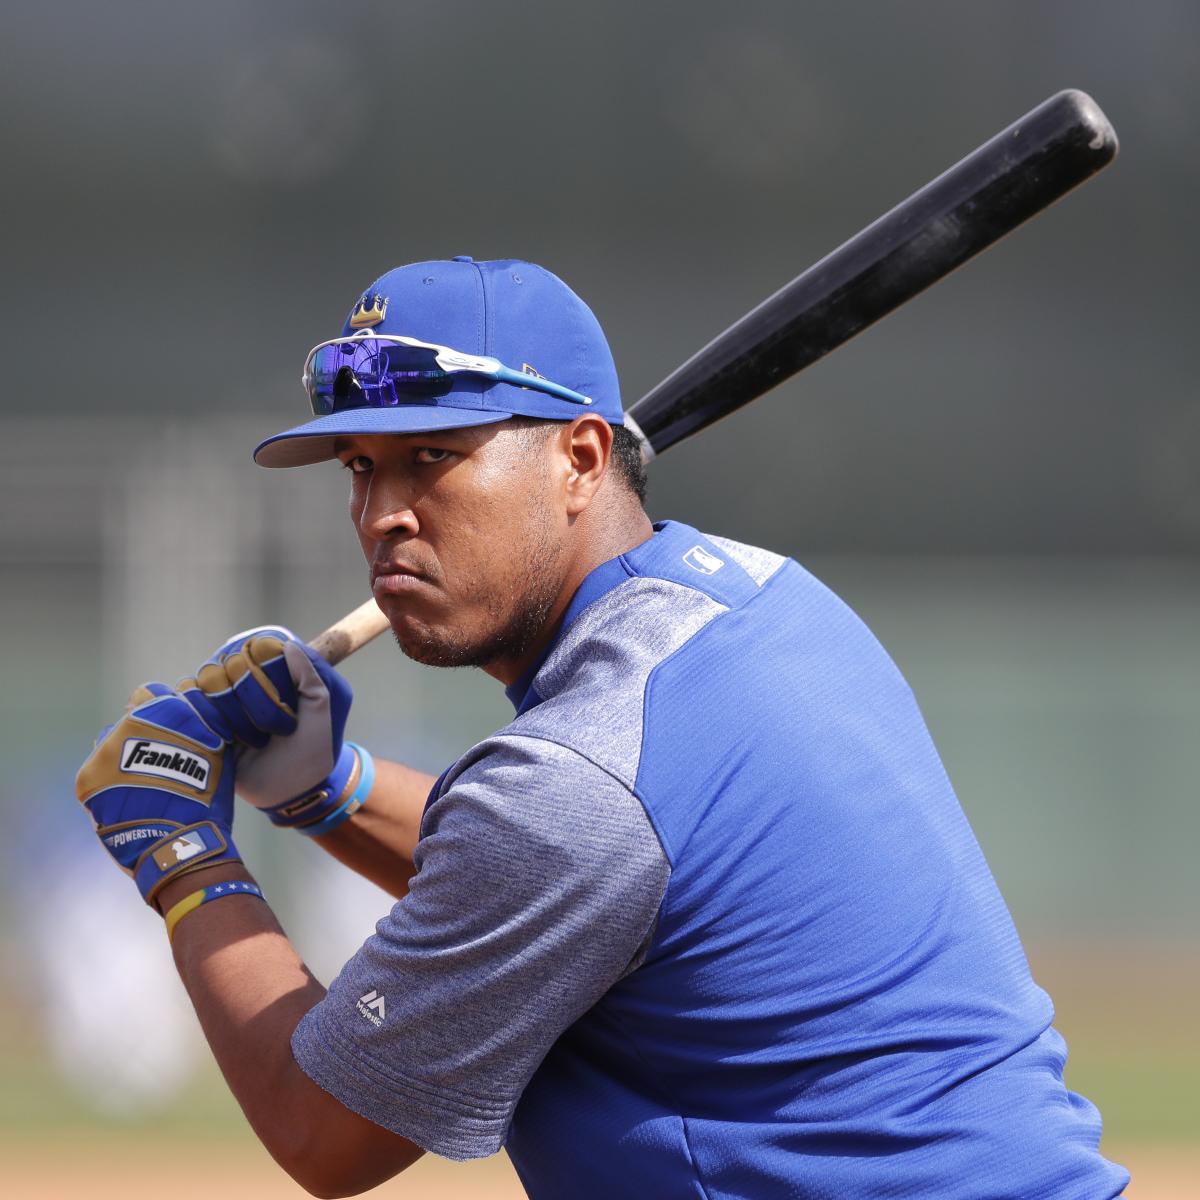 Royals catcher Salvador Perez on DL with intercostal strain